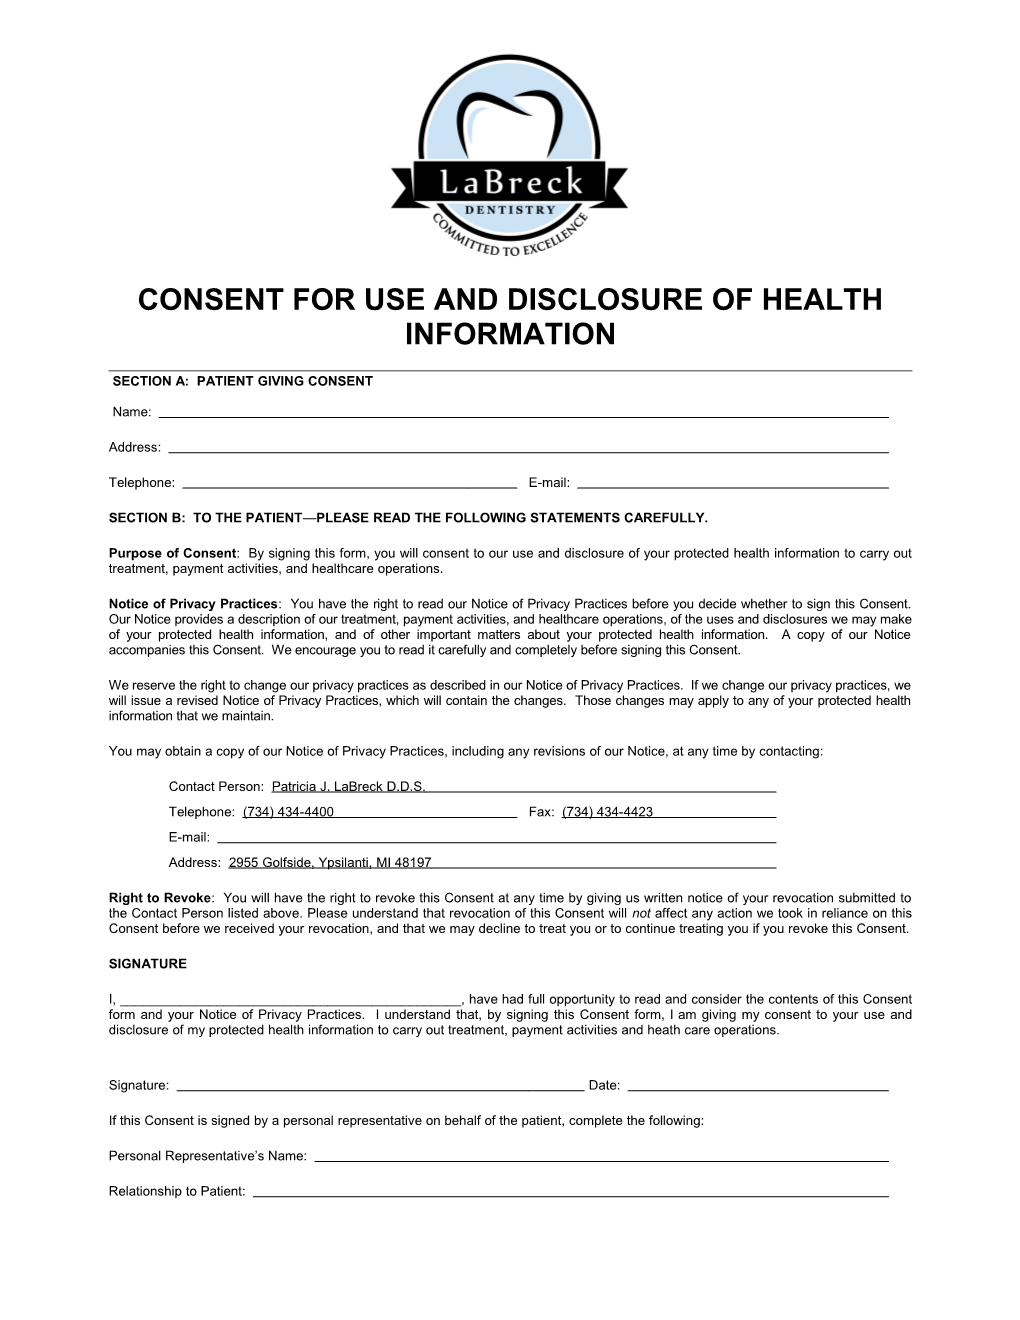 Form 01-Consent for Use and Disclosure of Health Information (01-COSNT;1)